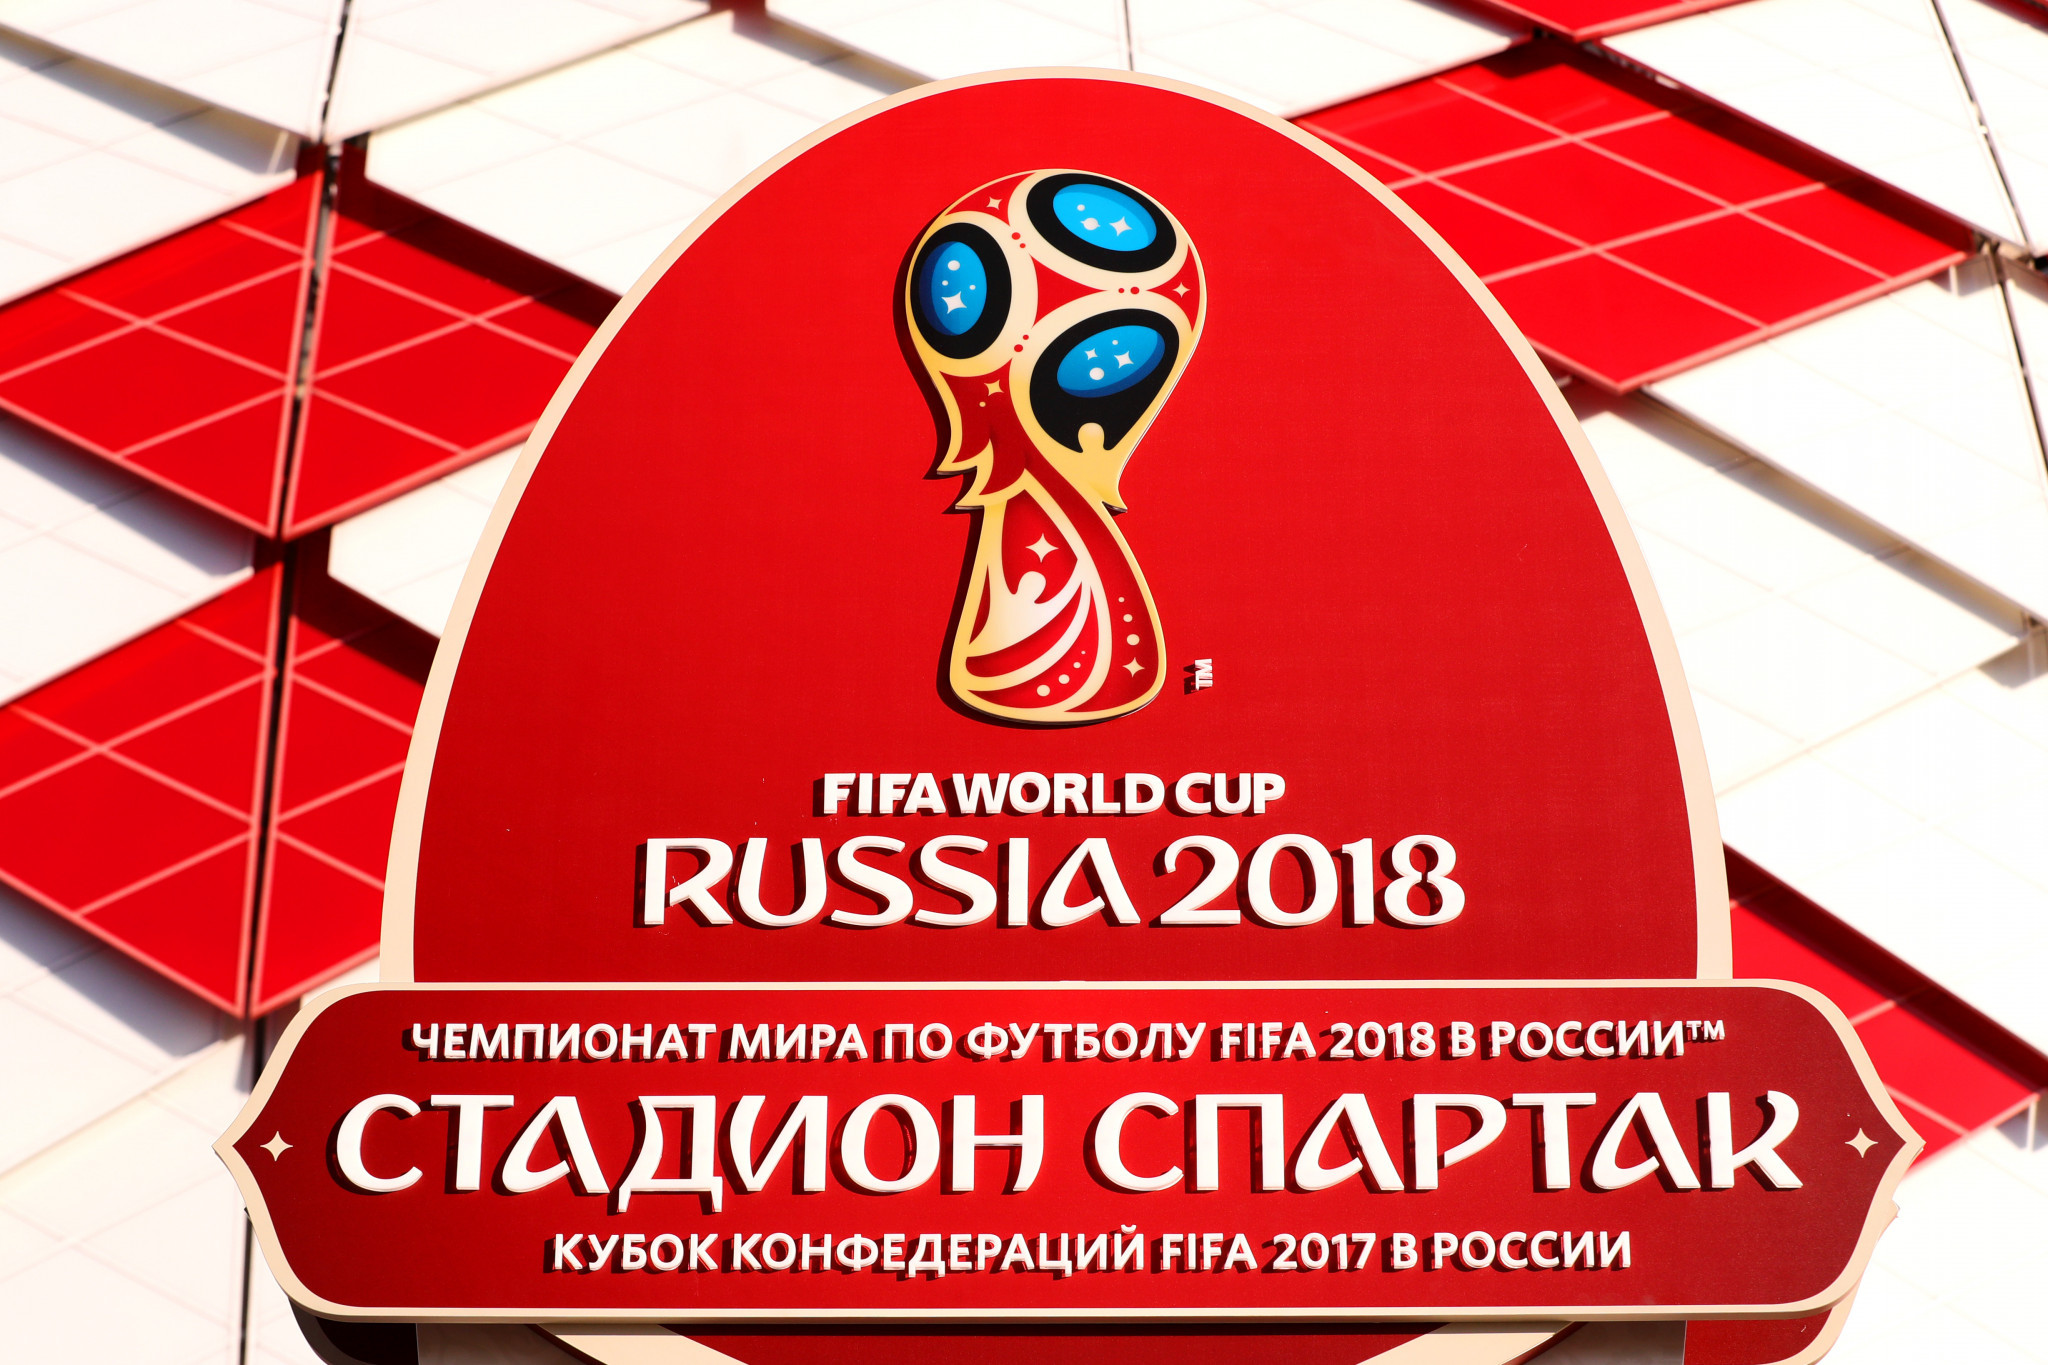 Almost 3.5 million tickets requested in first sales period for FIFA World Cup